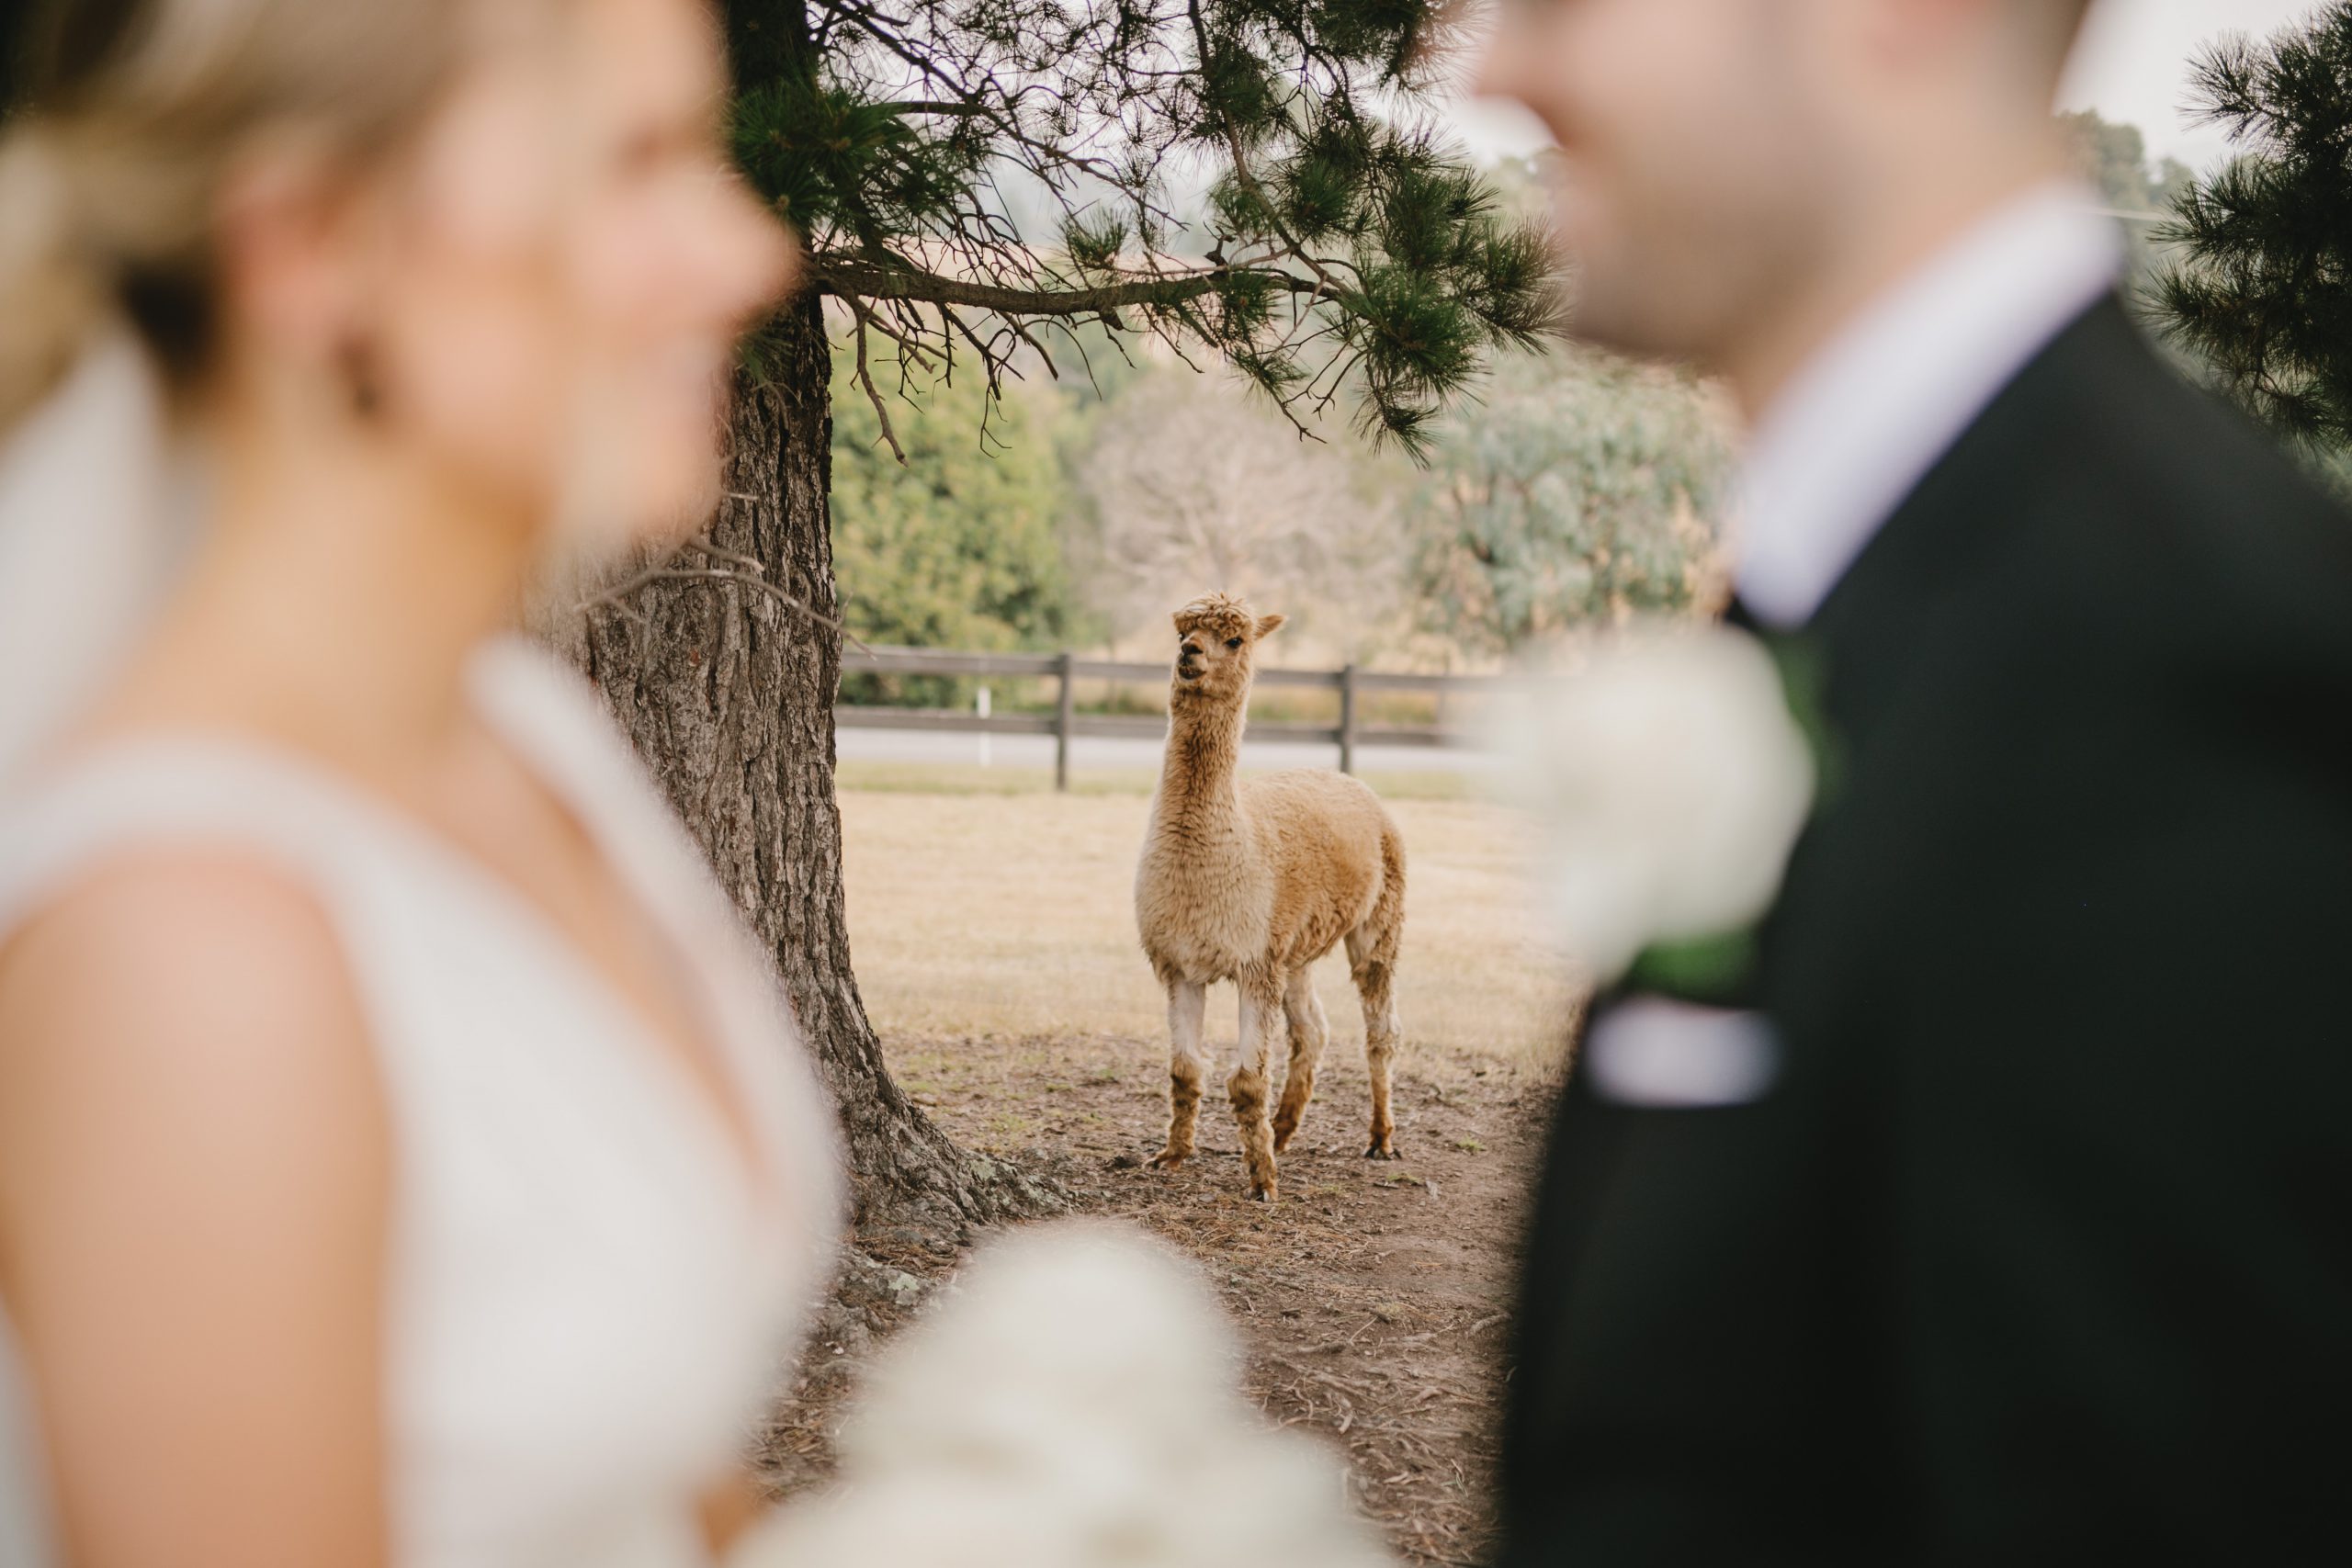 A bride and groom facing each other with an alpaca looking on.